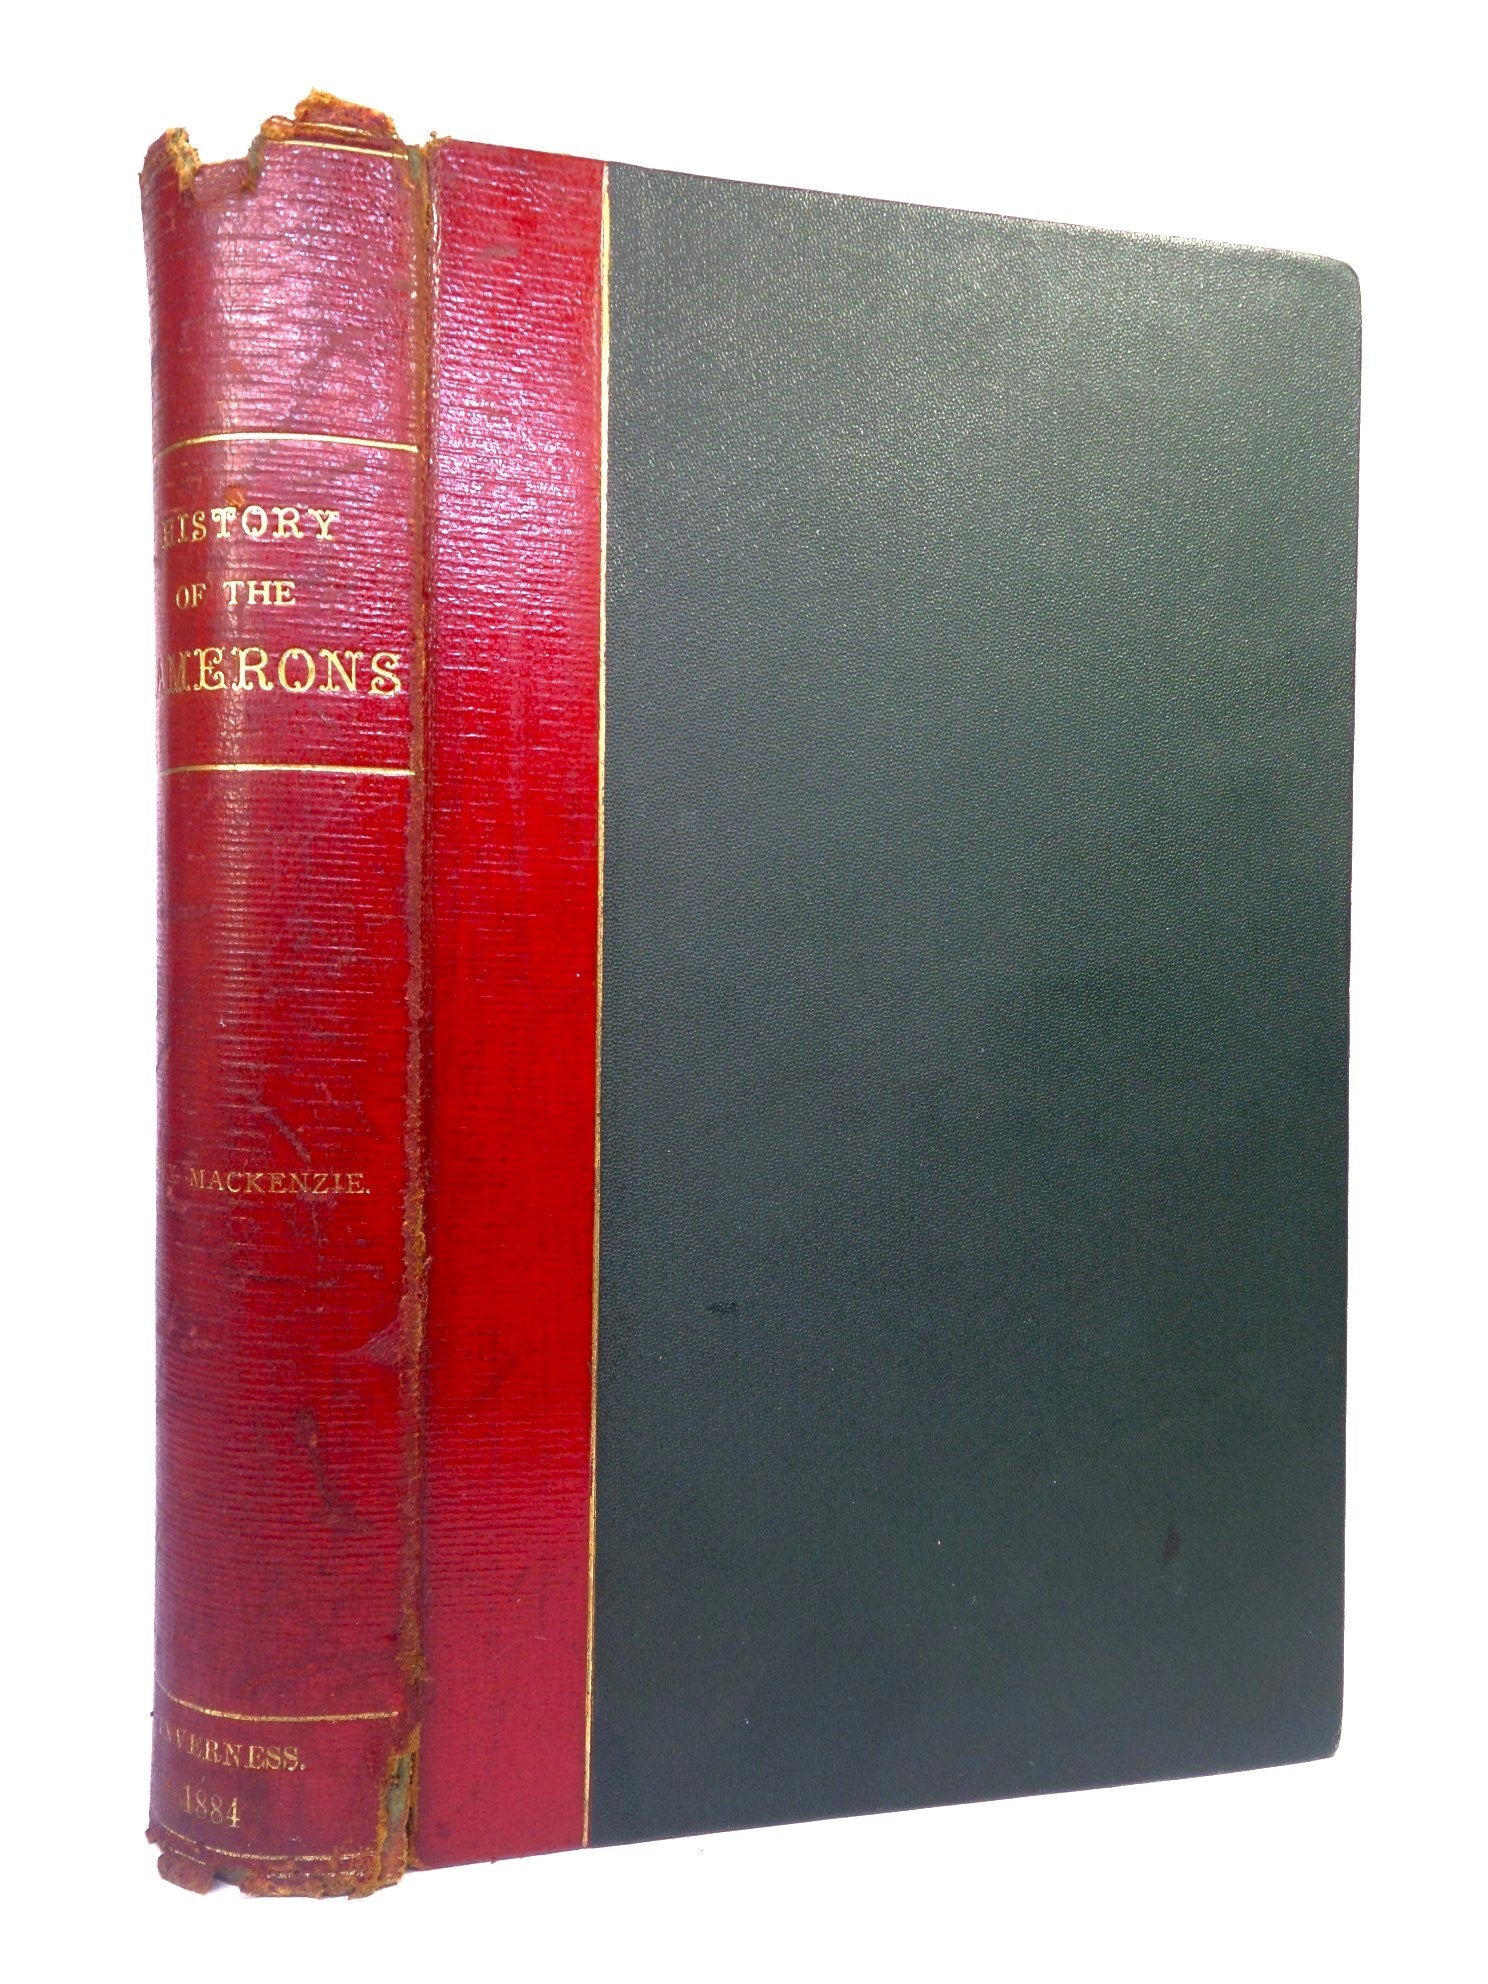 HISTORY OF THE CAMERONS BY ALEXANDER MACKENZIE 1884 LEATHER-BOUND FIRST EDITION